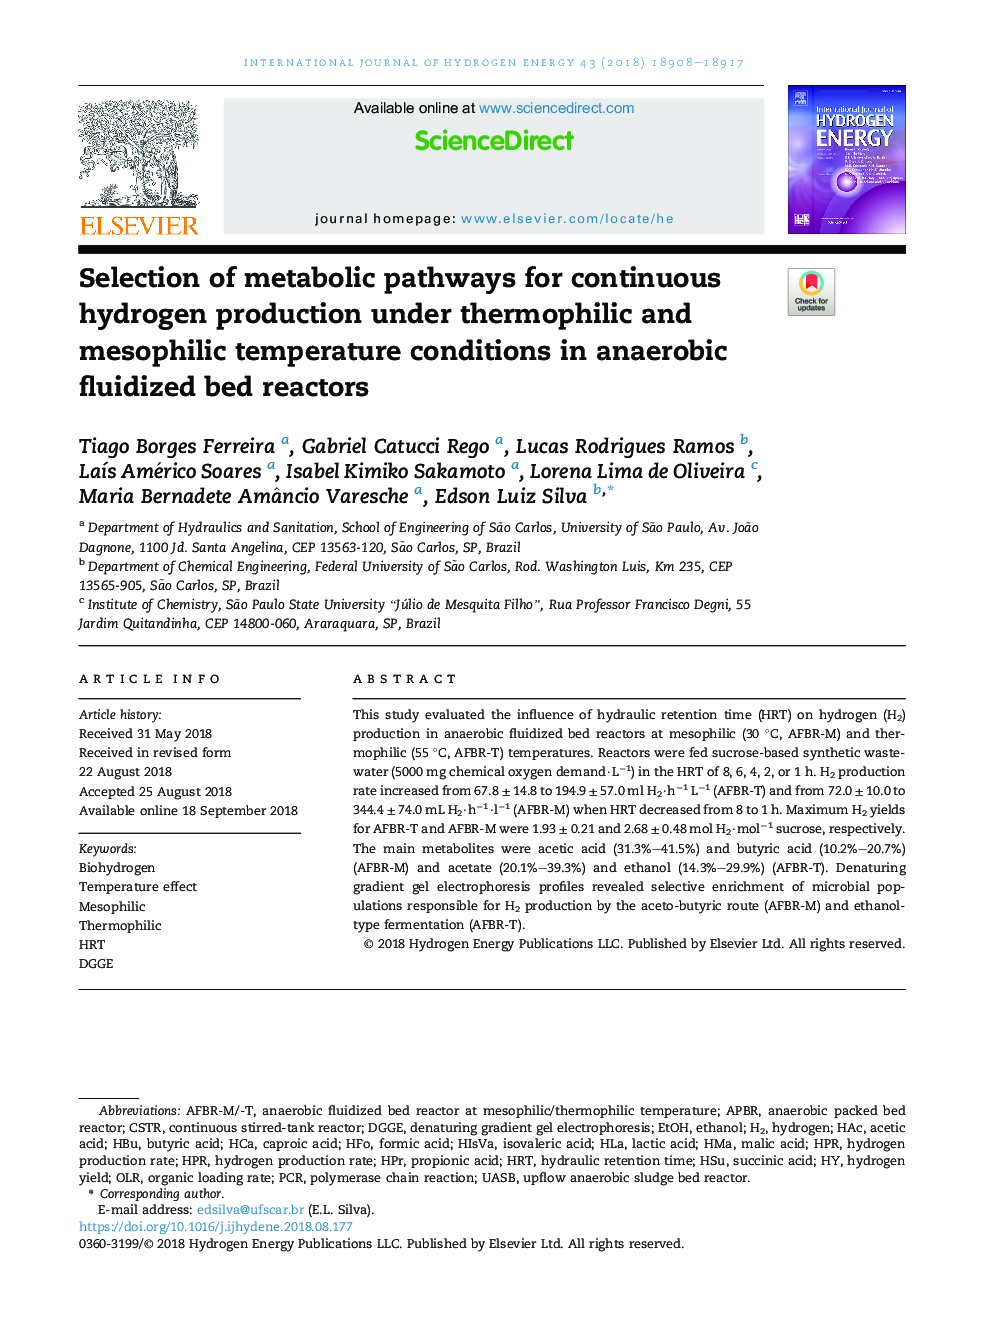 Selection of metabolic pathways for continuous hydrogen production under thermophilic and mesophilic temperature conditions in anaerobic fluidized bed reactors